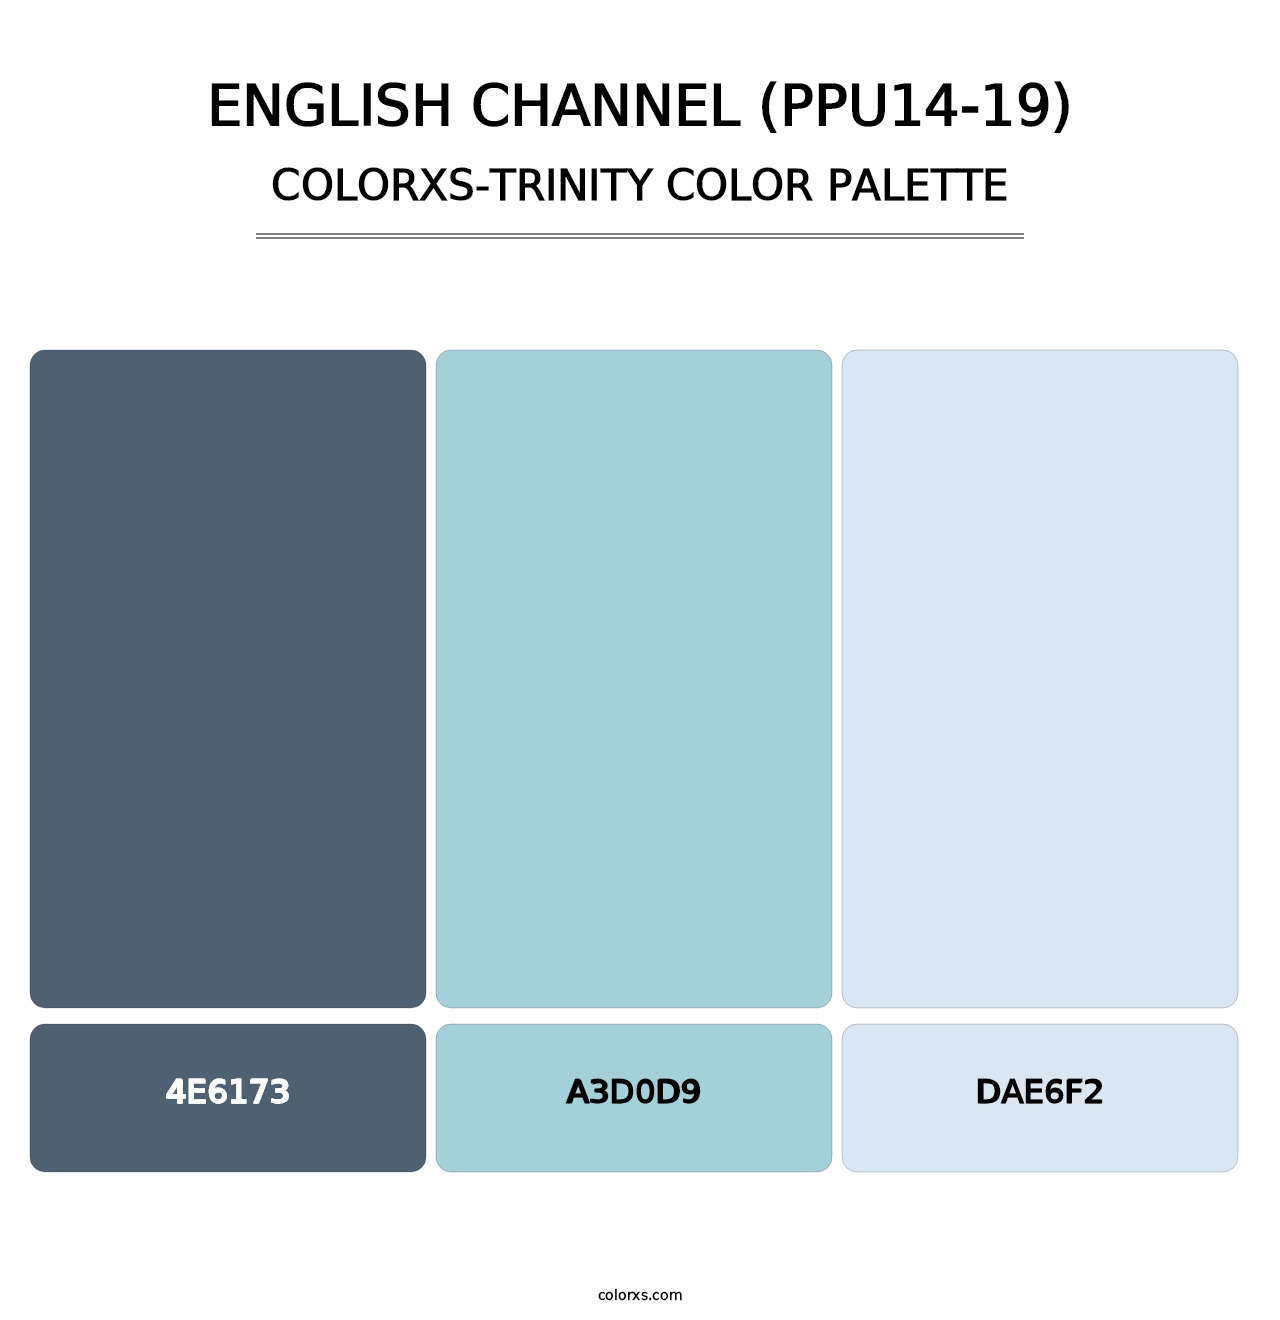 English Channel (PPU14-19) - Colorxs Trinity Palette